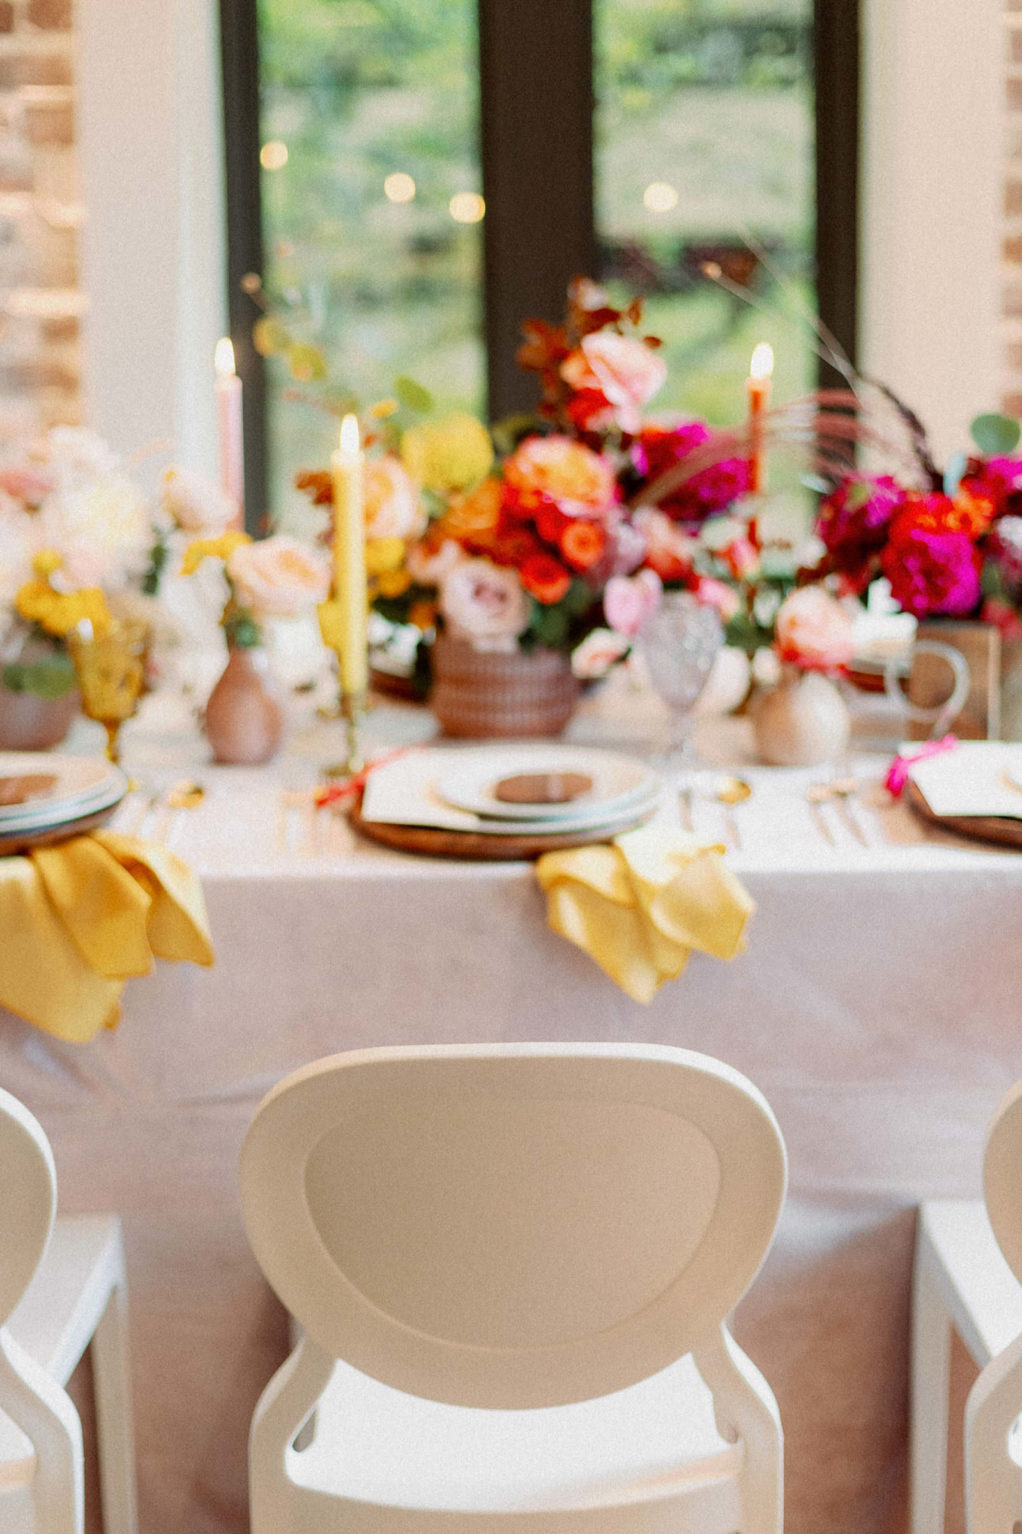 Whimsical and Colorful Wedding Reception Decor, White Dining Chairs, Yellow, Red and White Candlesticks, Colorful Flower Low Centerpieces | St. Pete Modern Industrial Wedding Venue Red Mesa Events | Tampa Wedding Photographer Dewitt for Love | Linen Rentals Kate Ryan Event Rentals